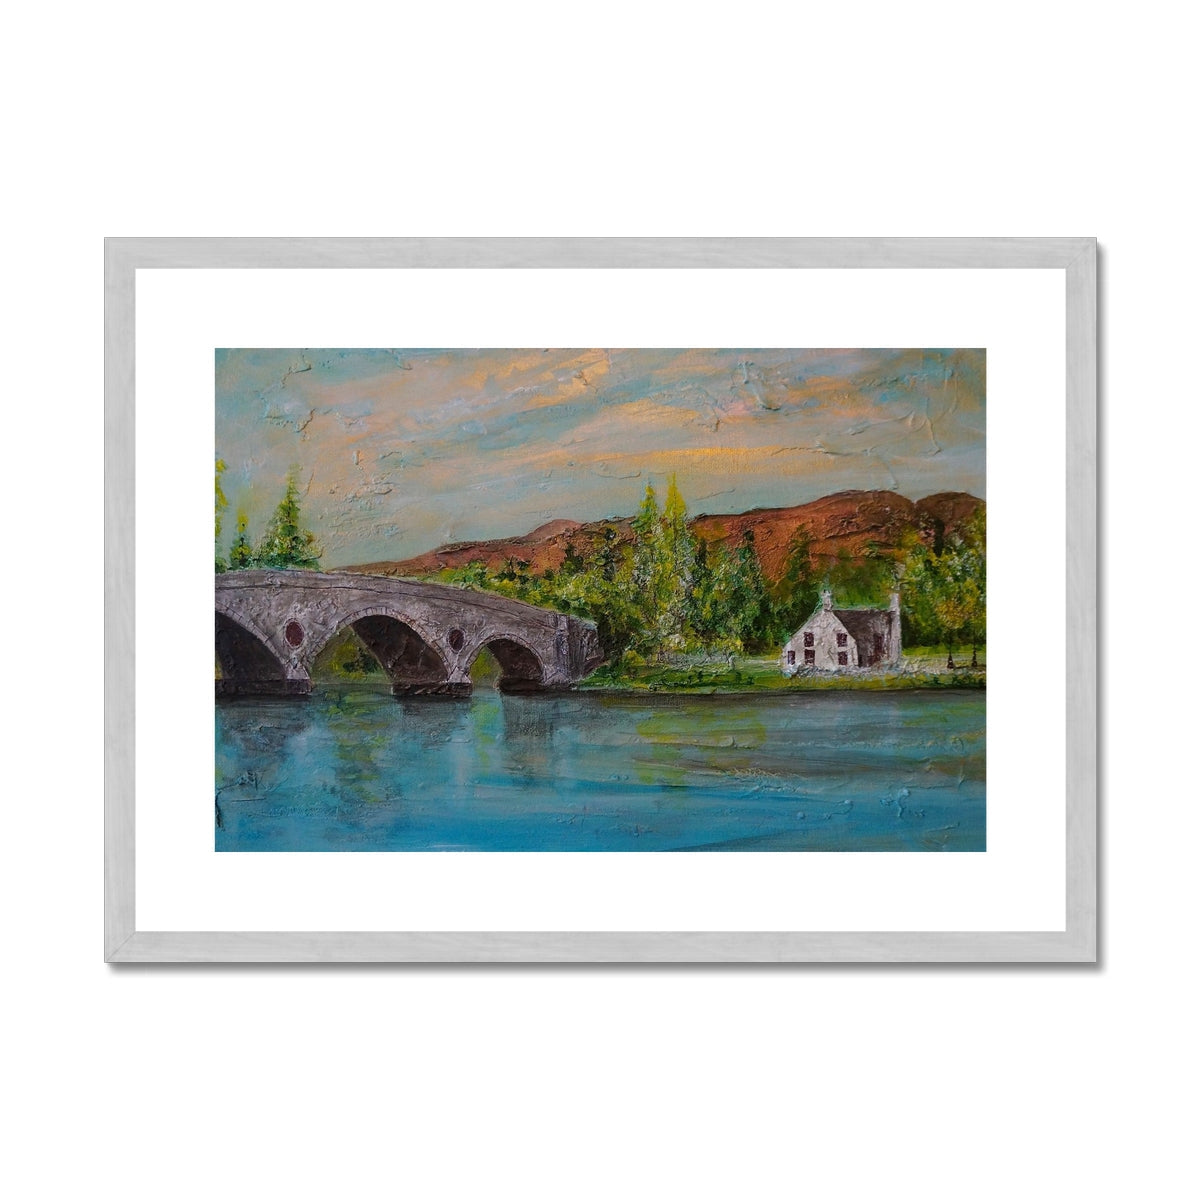 Kenmore Bridge ii Painting | Antique Framed & Mounted Prints From Scotland-Antique Framed & Mounted Prints-Scottish Highlands & Lowlands Art Gallery-A2 Landscape-Silver Frame-Paintings, Prints, Homeware, Art Gifts From Scotland By Scottish Artist Kevin Hunter